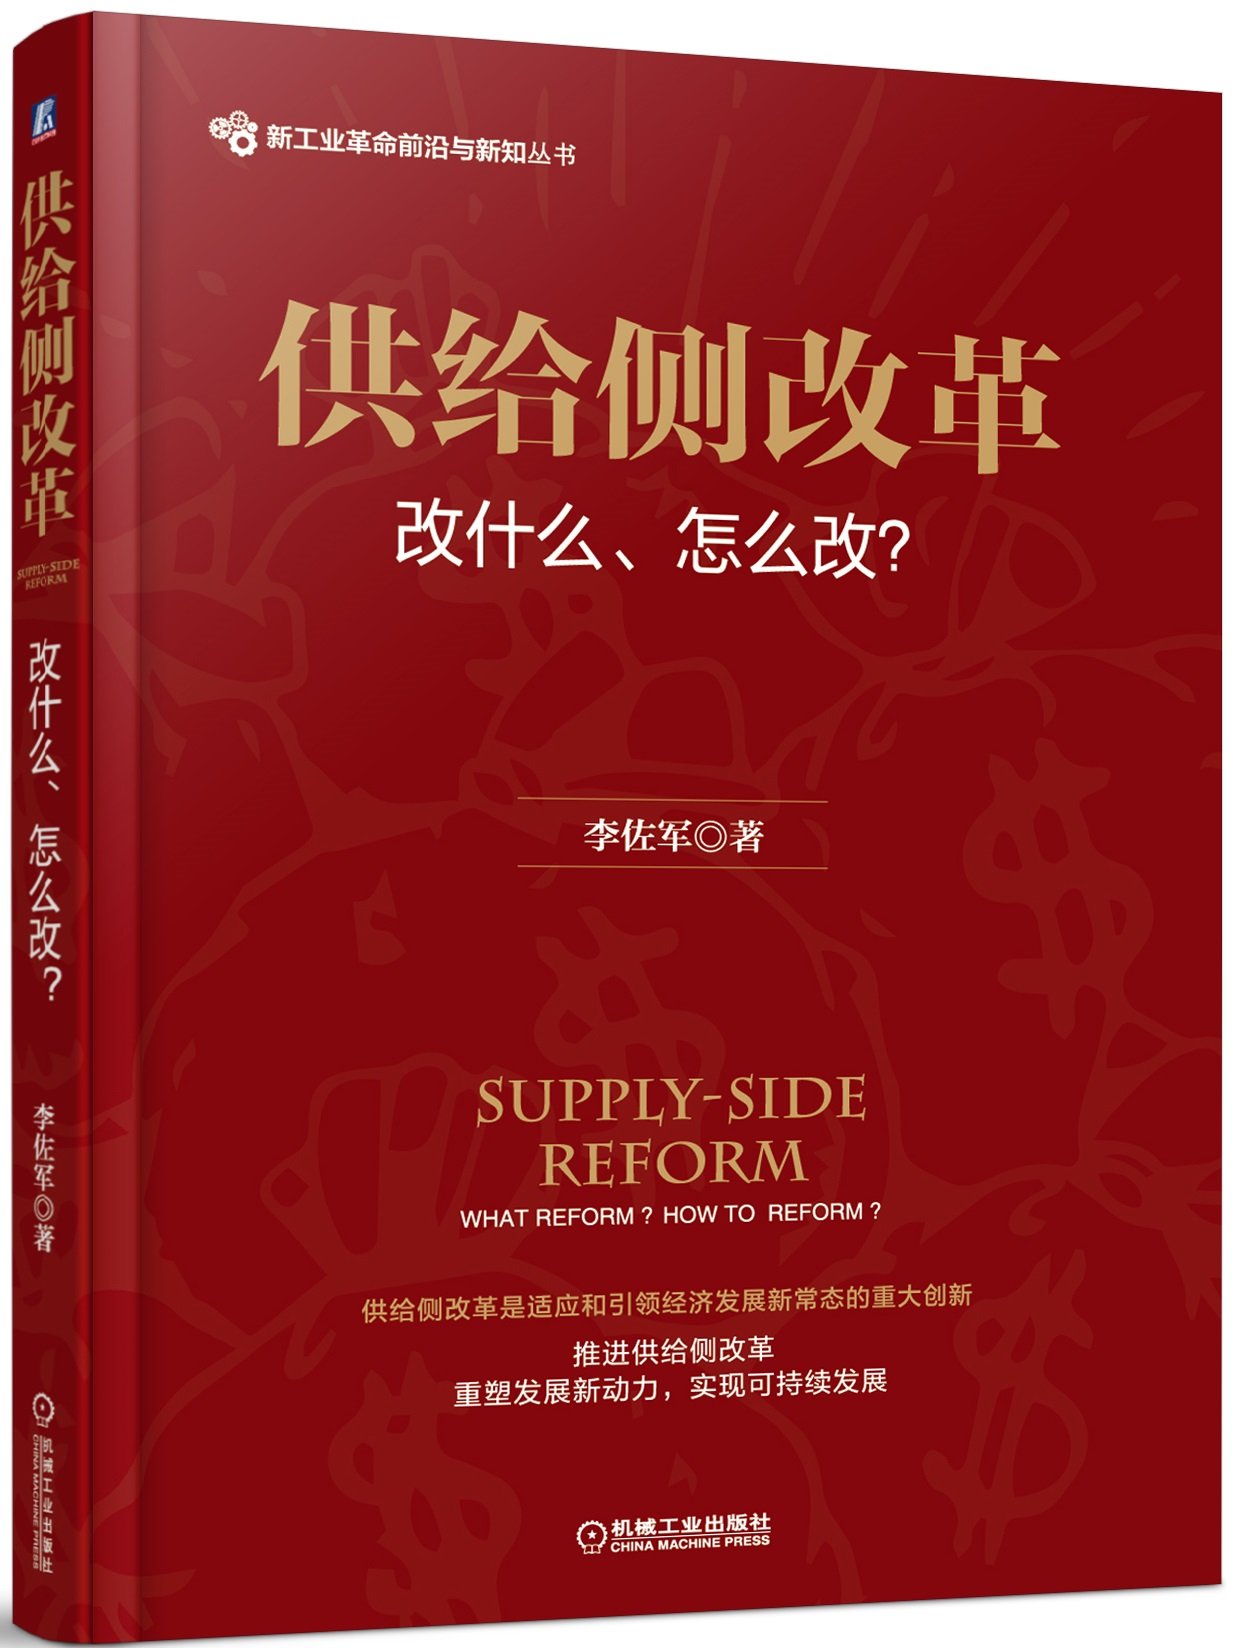 Preface to “Supply-side Reform: What to Reform and How to Reform?”